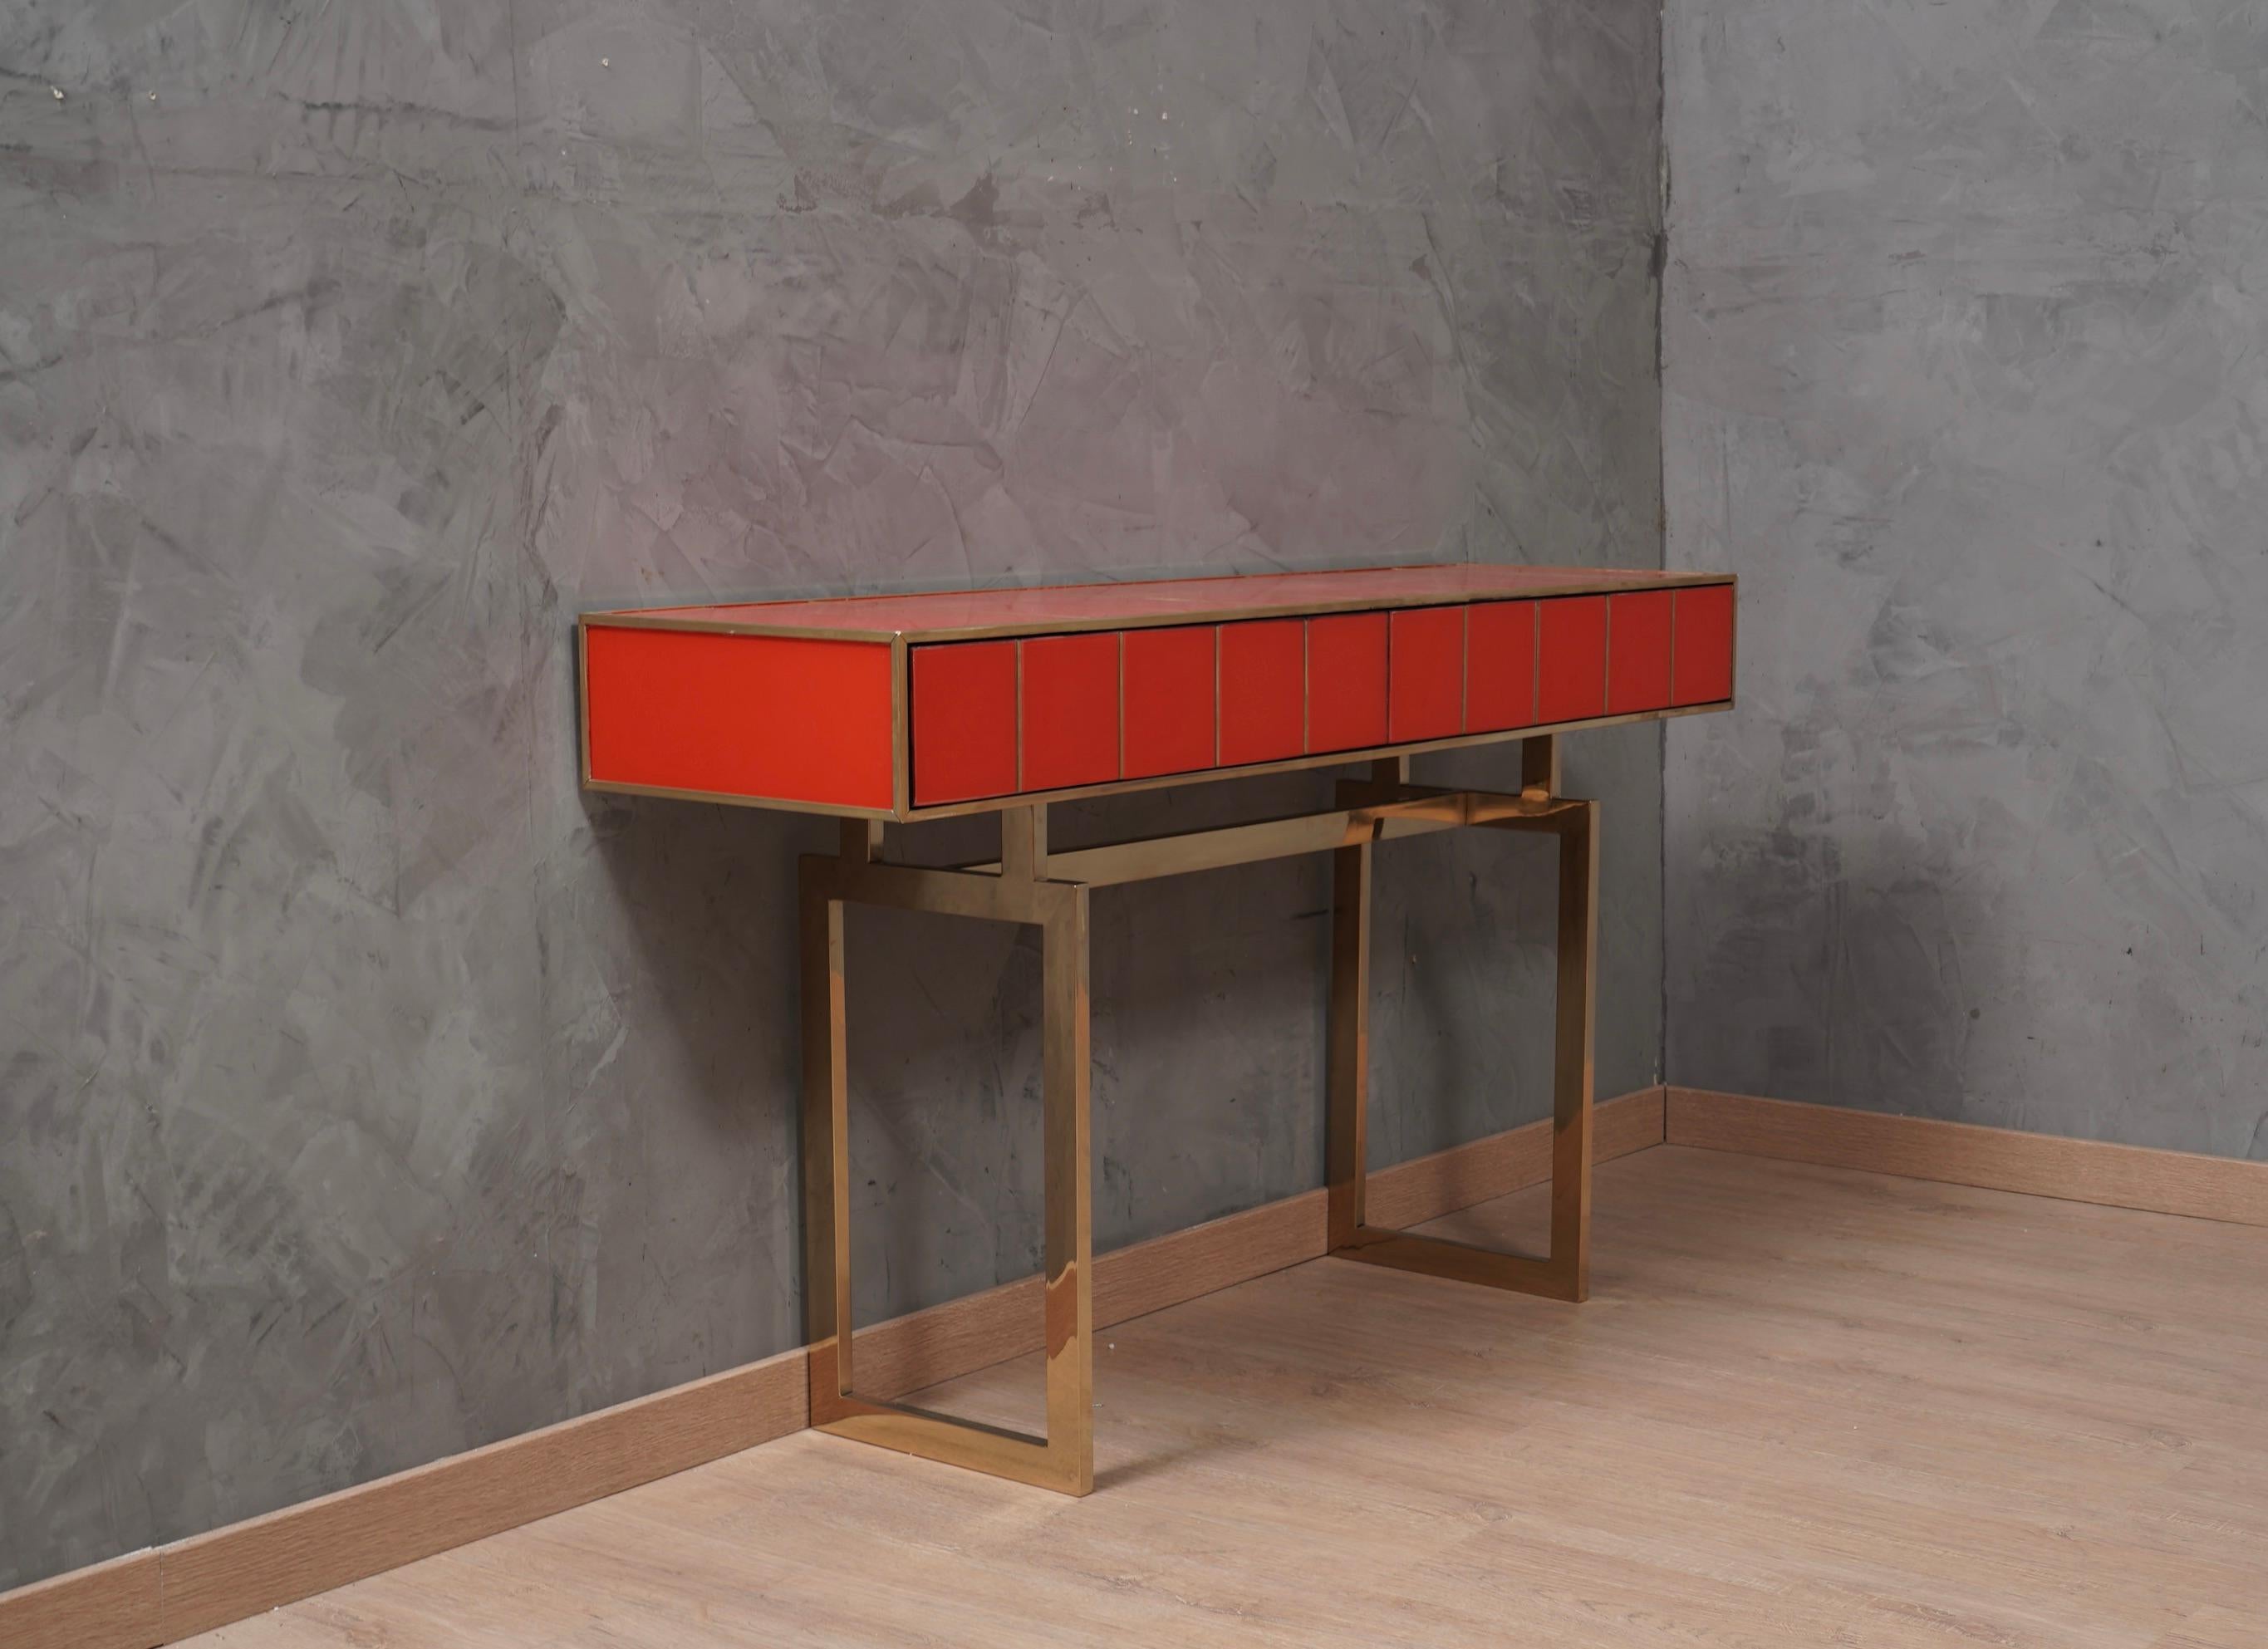 Original in shape for a console rich in its workmanship, strong color and very beautiful design. Roomy and well articulated, the console has a very refined and elegant design.

The console is composed of a top covered in red glass interspersed with